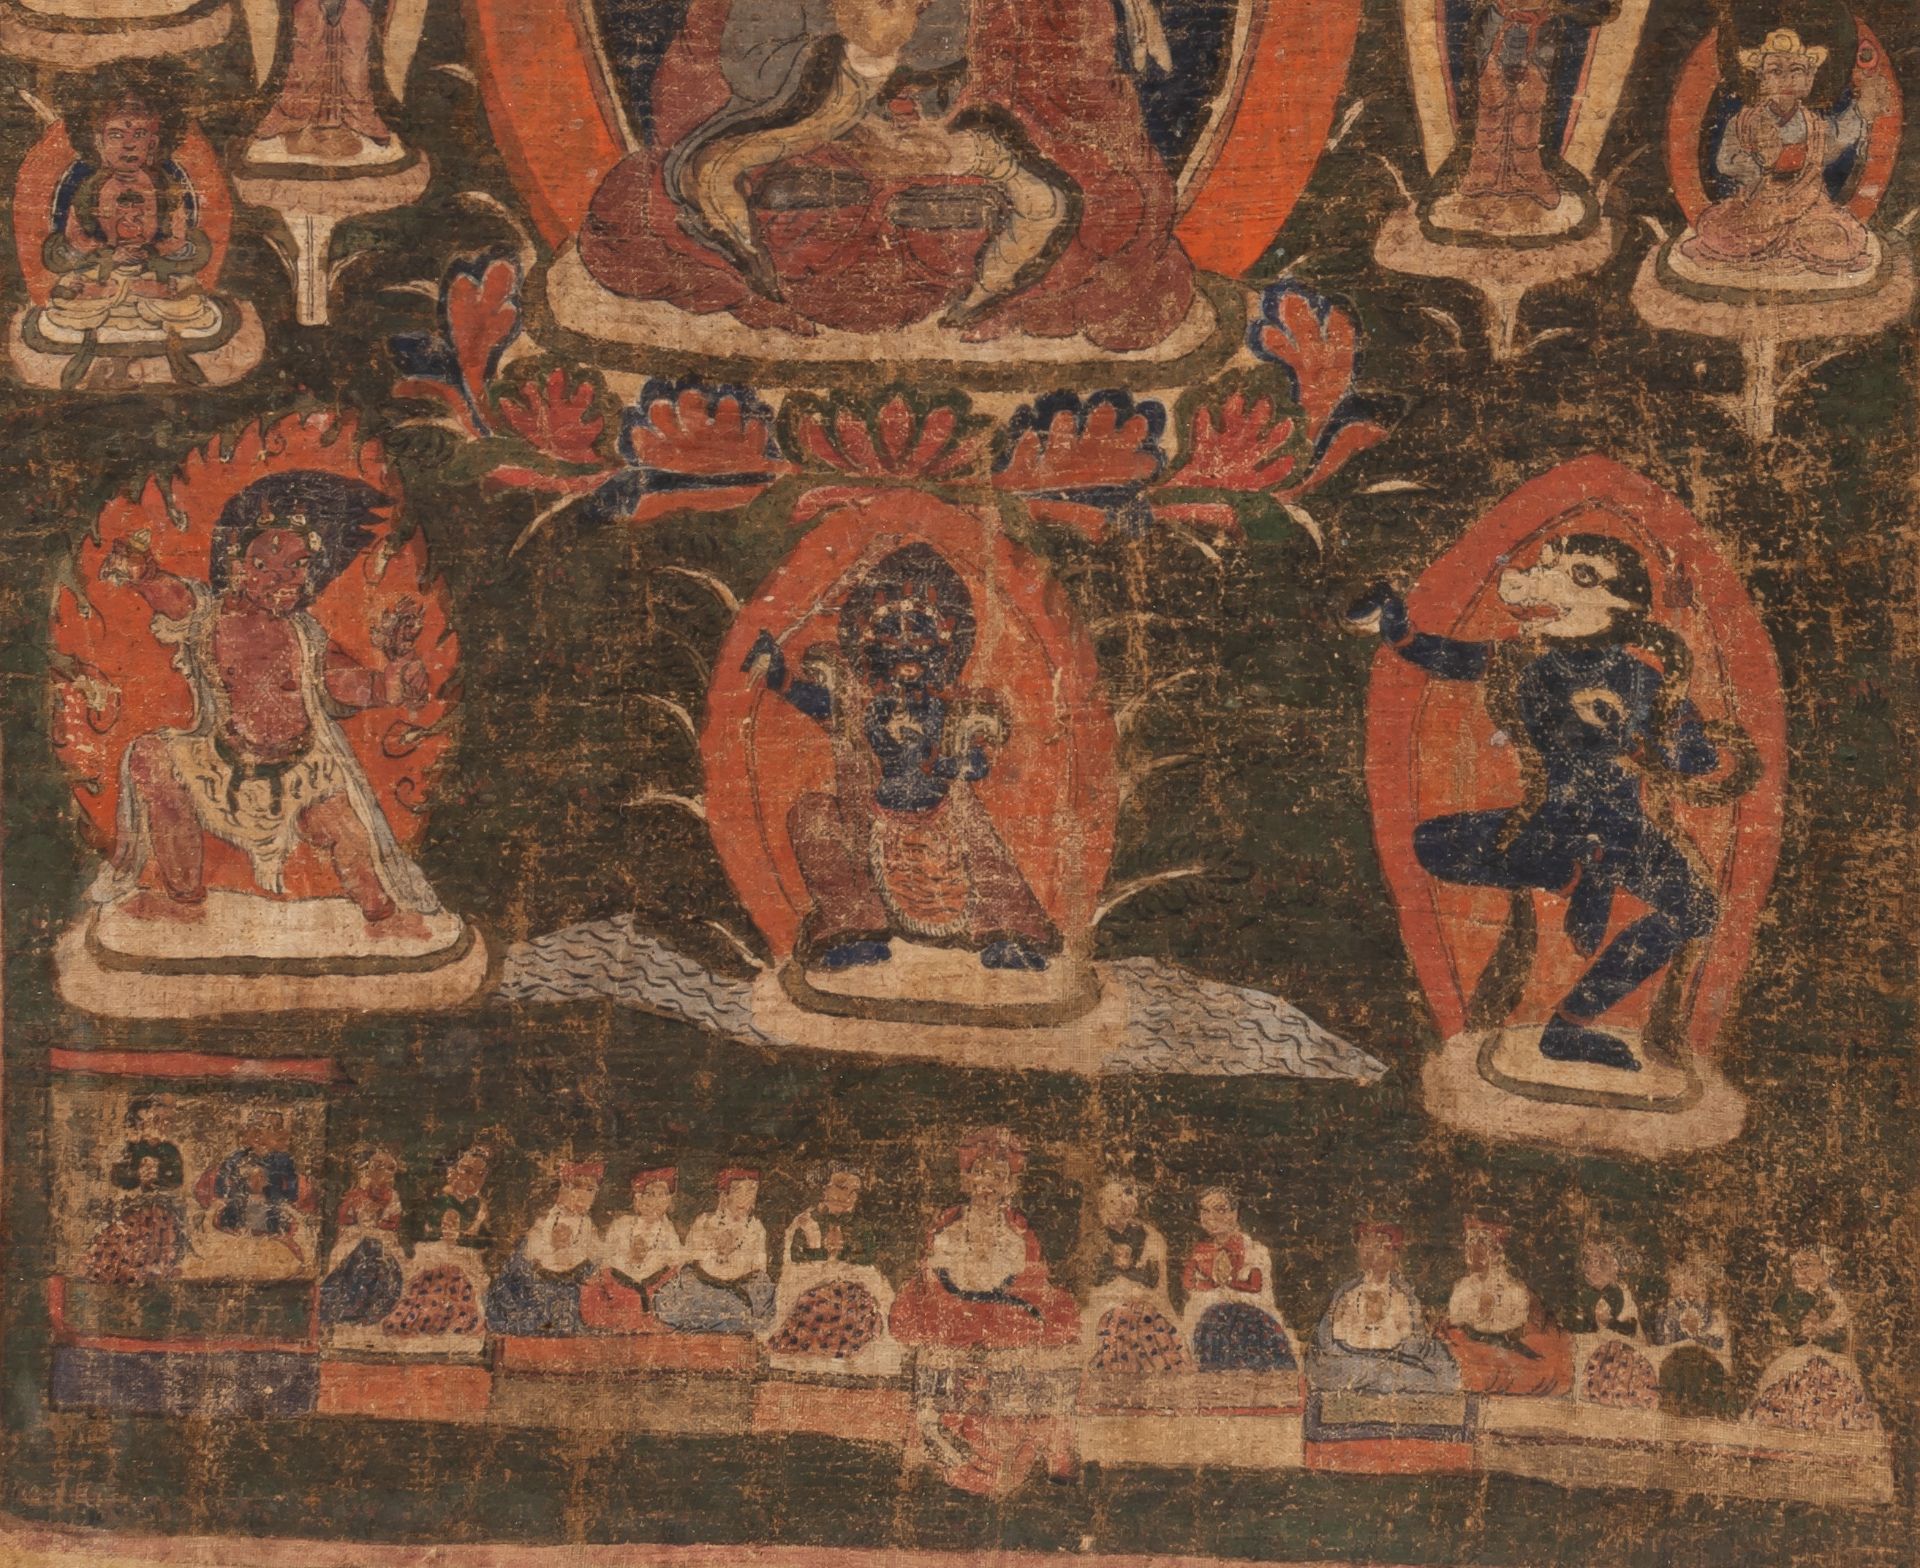 A Nepalese buddhist thangka, 18th/19th century, 59 x 75 cm - Image 5 of 5